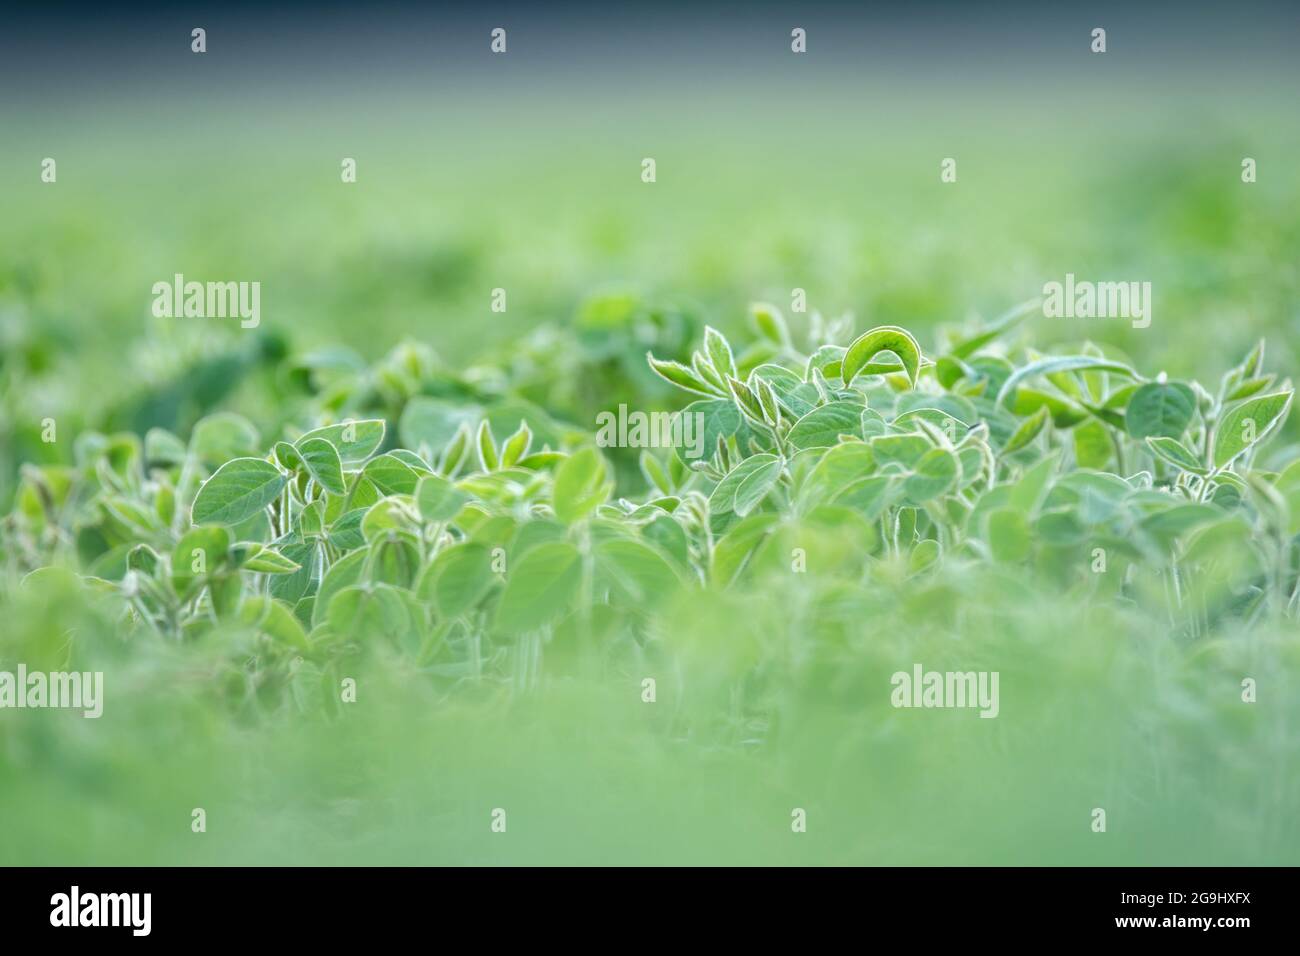 Soy plants growing in a soy field, shallow depth of field Stock Photo